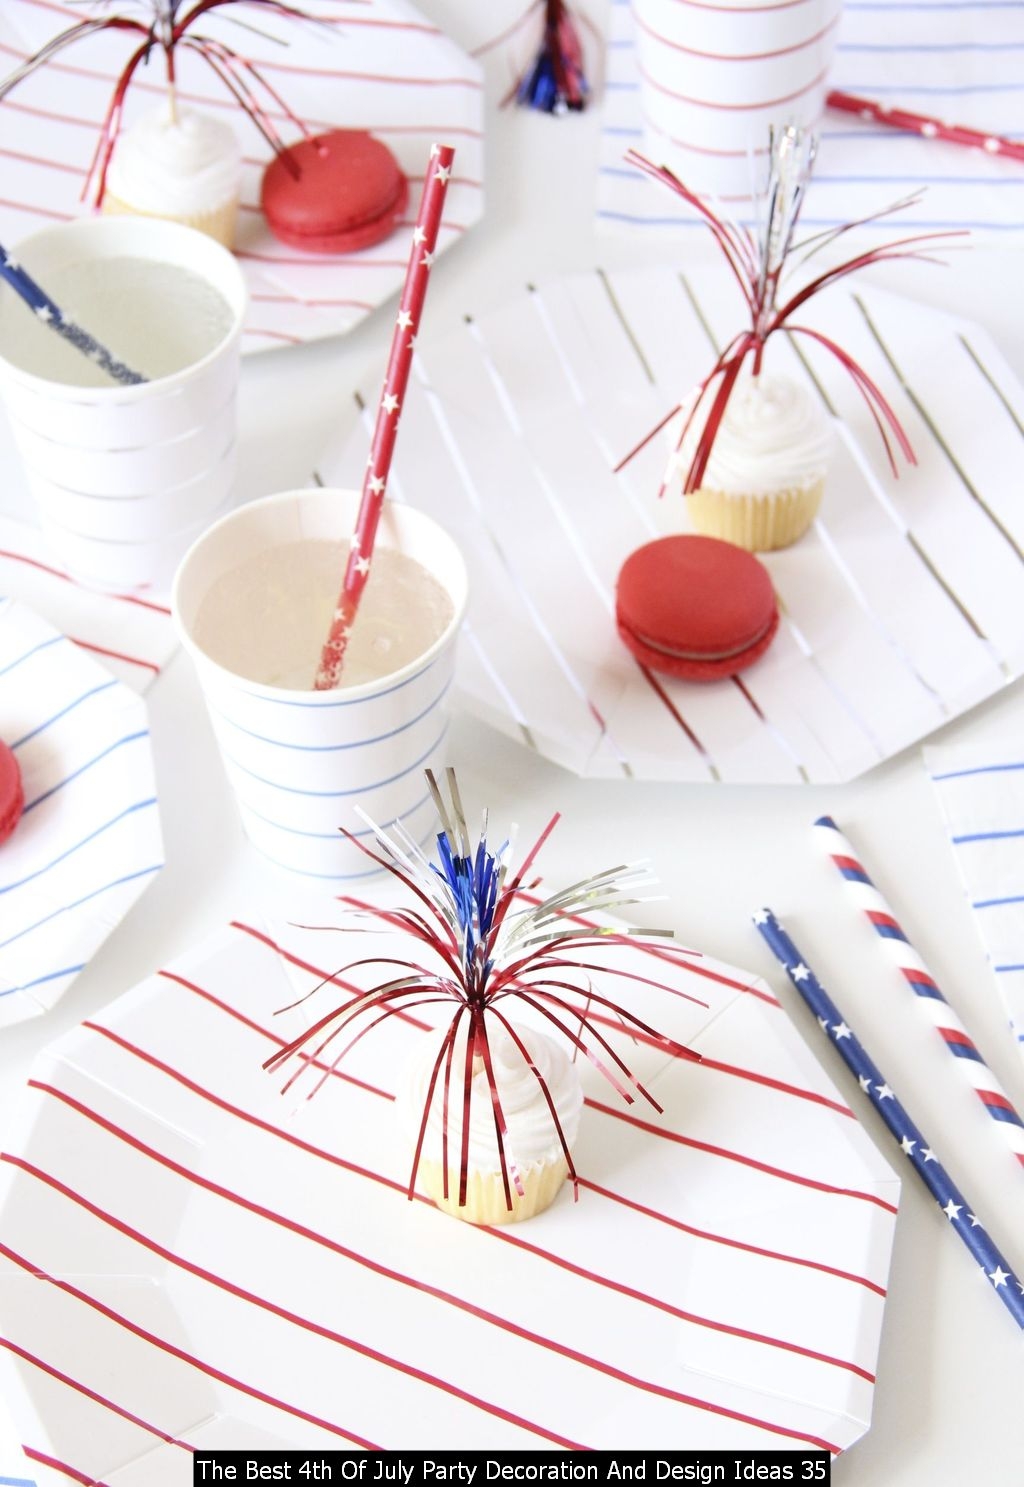 The Best 4th Of July Party Decoration And Design Ideas 35